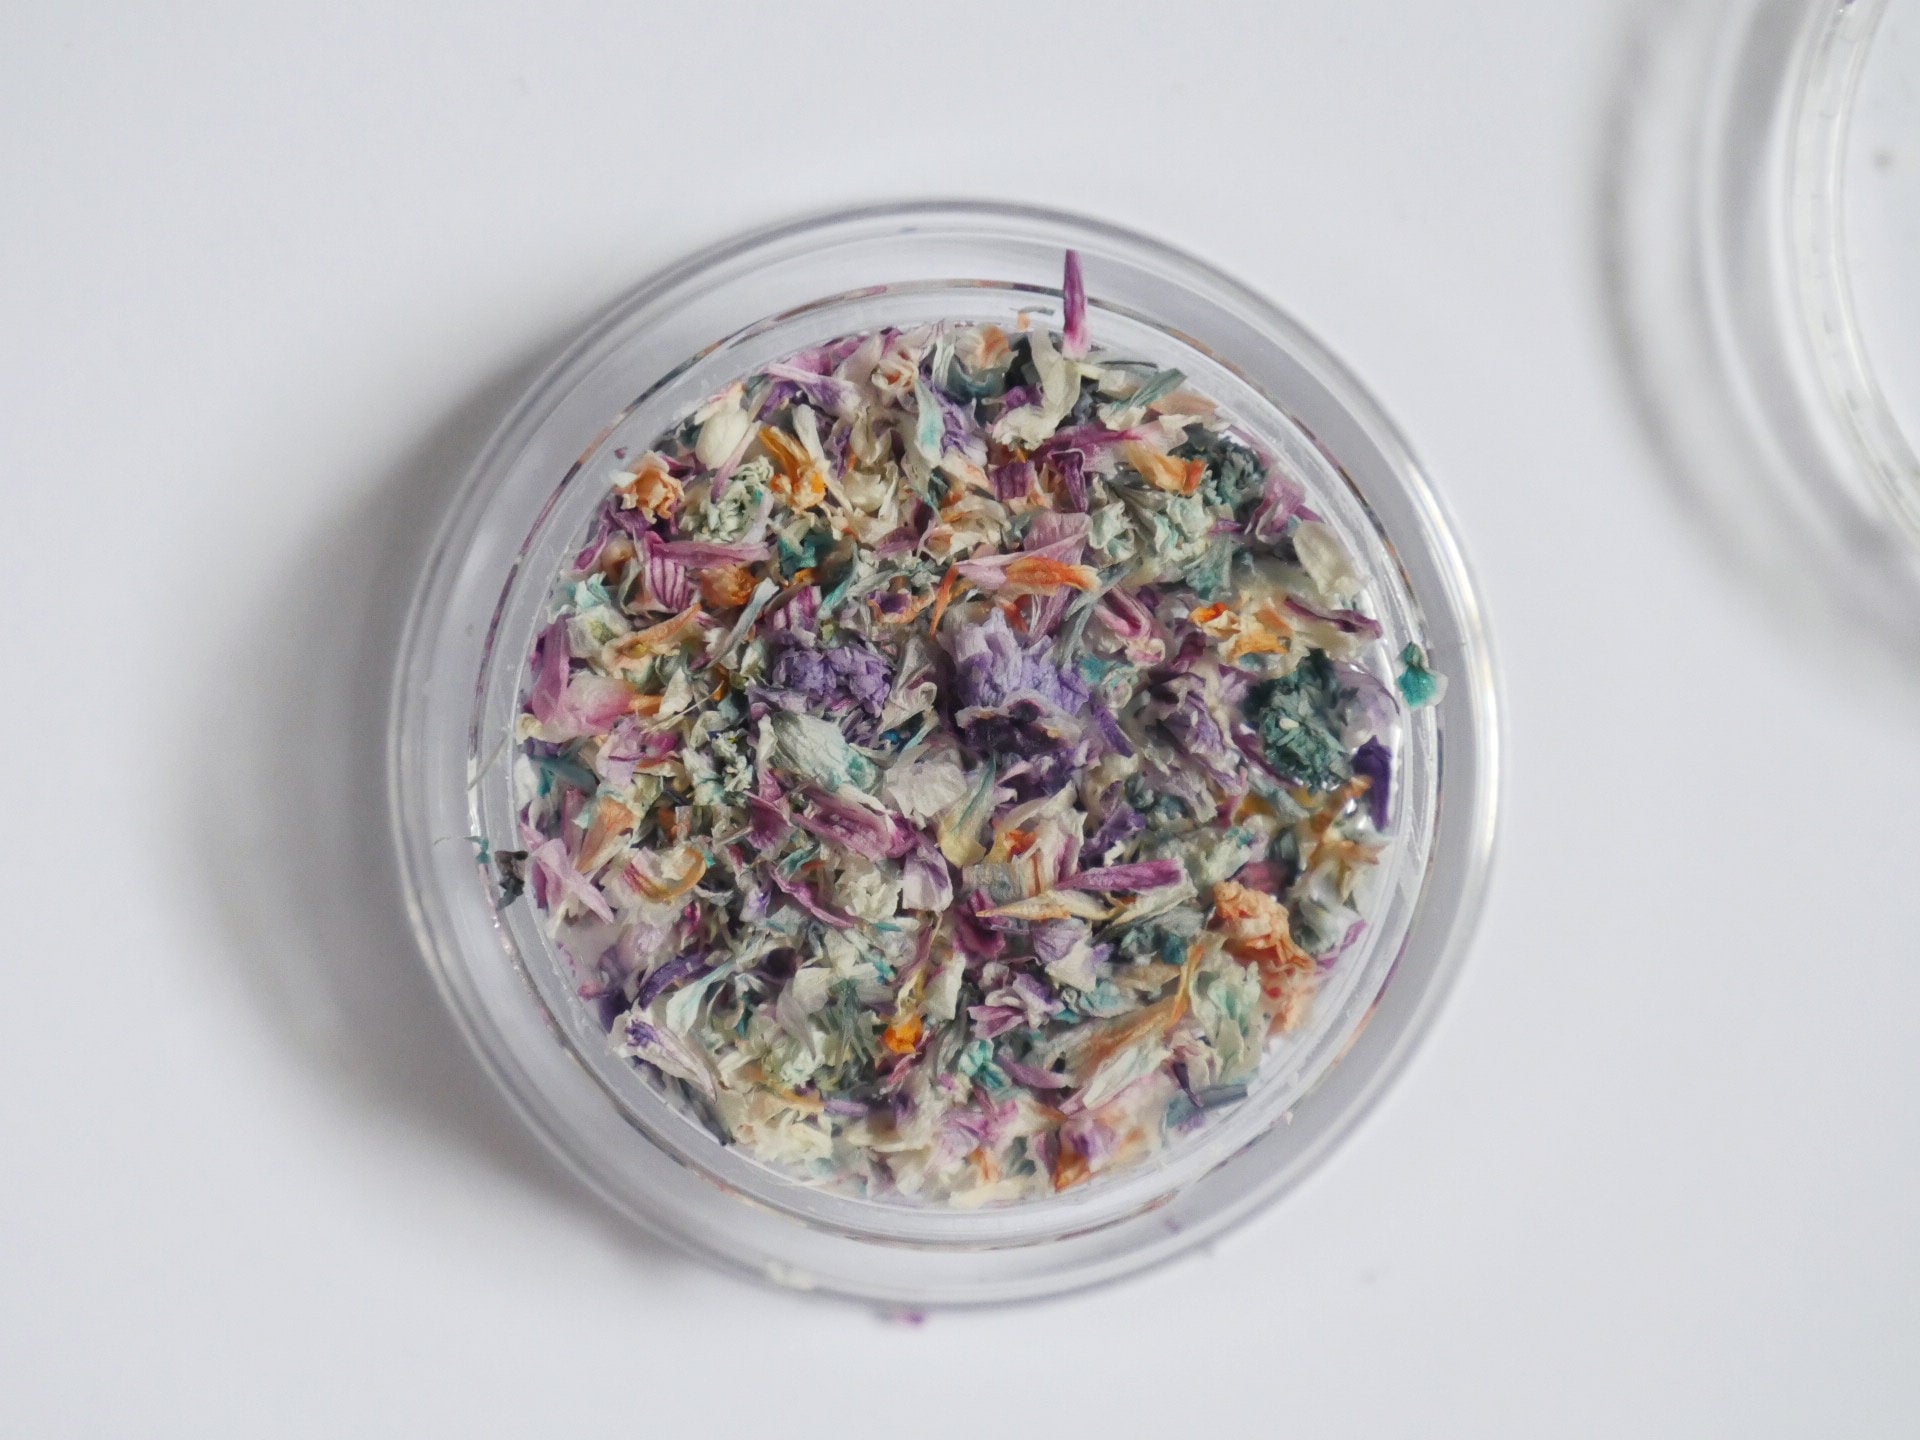 1 case Dried Pressed Real Flower Petals/ Drying Mixed Cute Retro Floral supply for Crafts Nail art UV resin supply